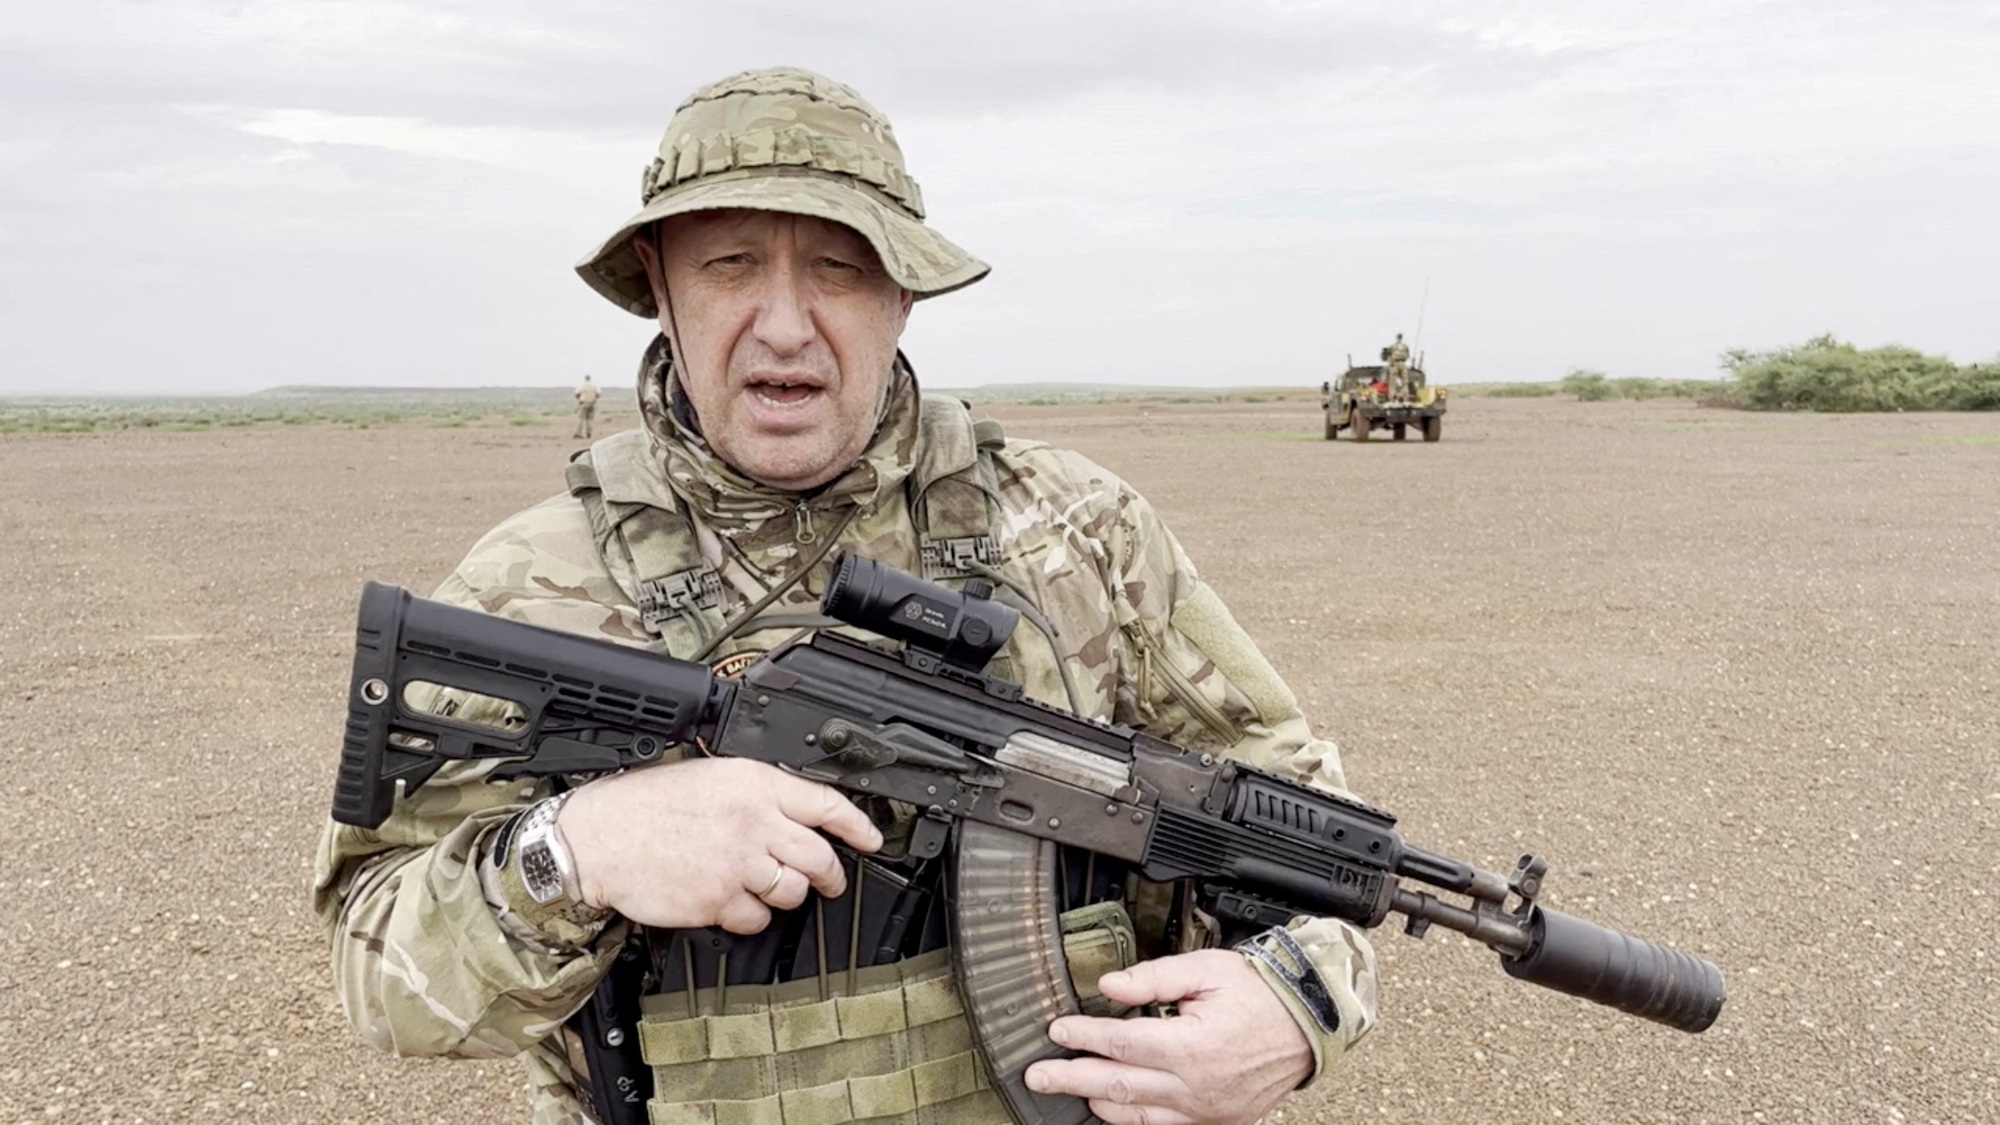 Yevgeny Prigozhin, chief of Russian private mercenary group Wagner, gives an address at an unknown location, in this still image taken from video possibly shot in Africa, on Monday.